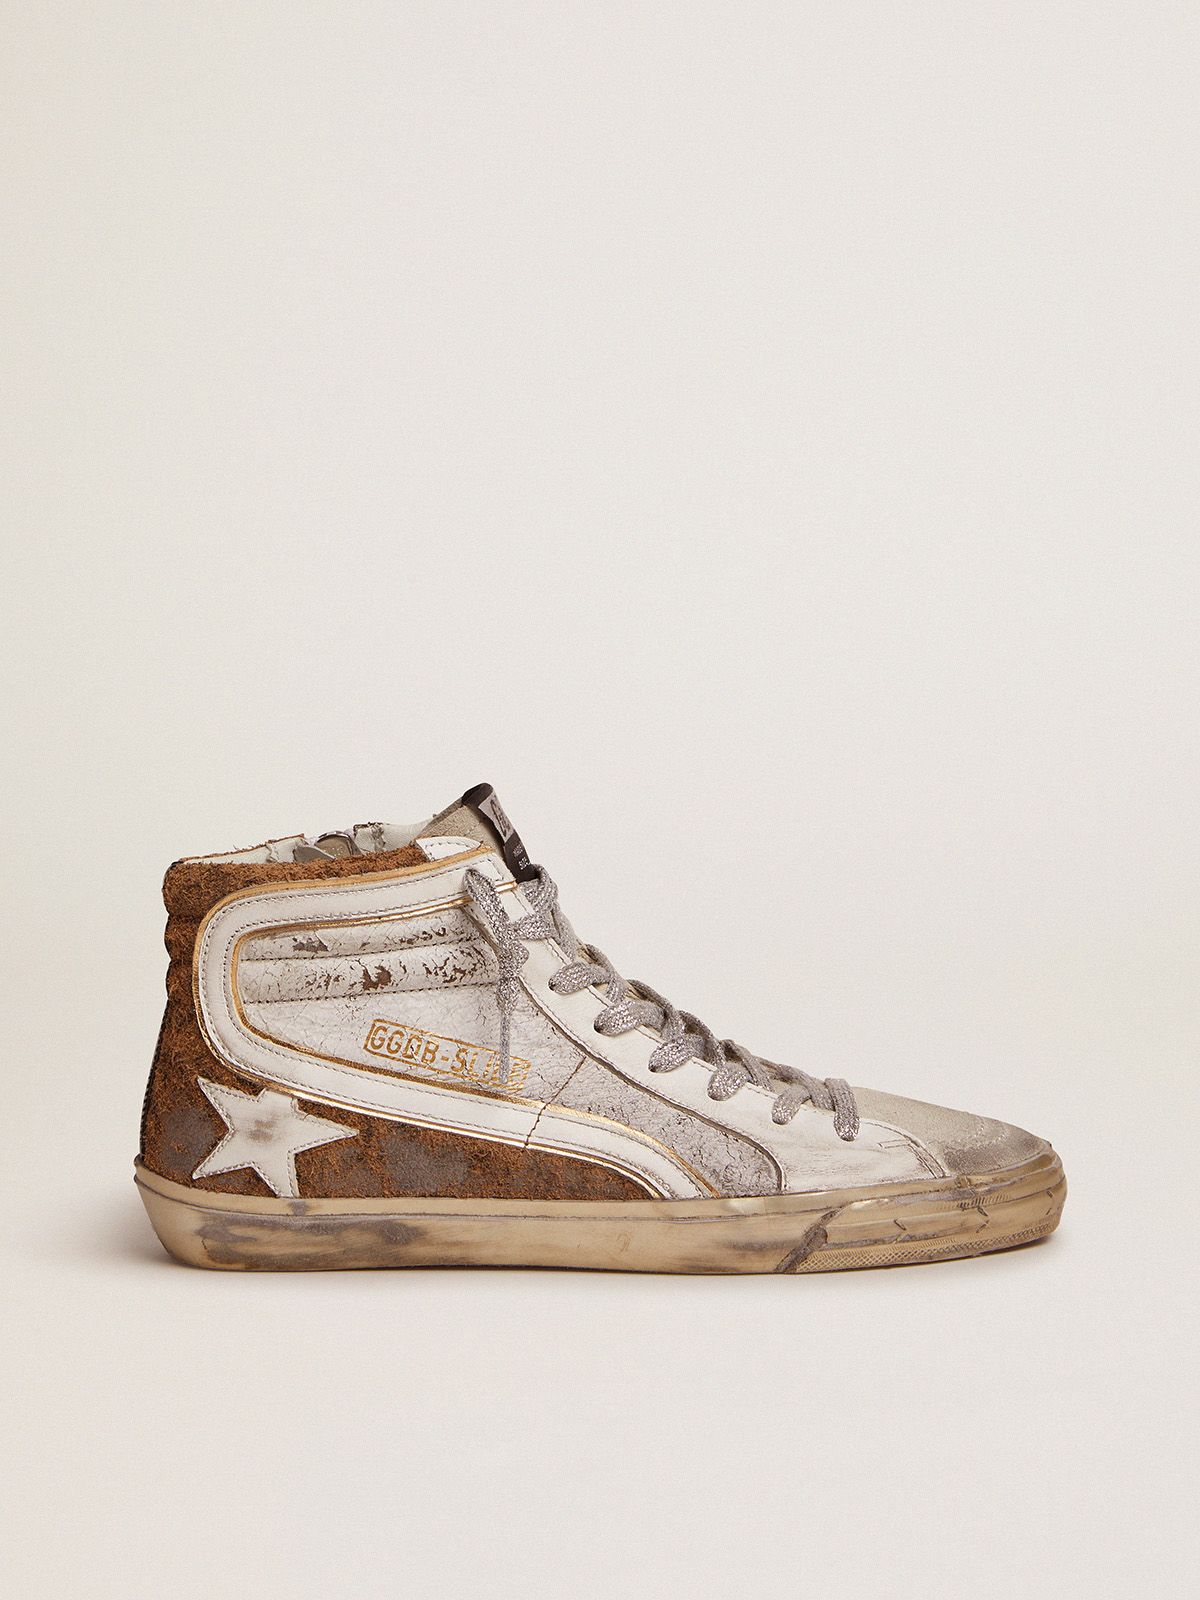 Golden Goose Bambina Slide sneakers in crackle leather and leopard-print suede